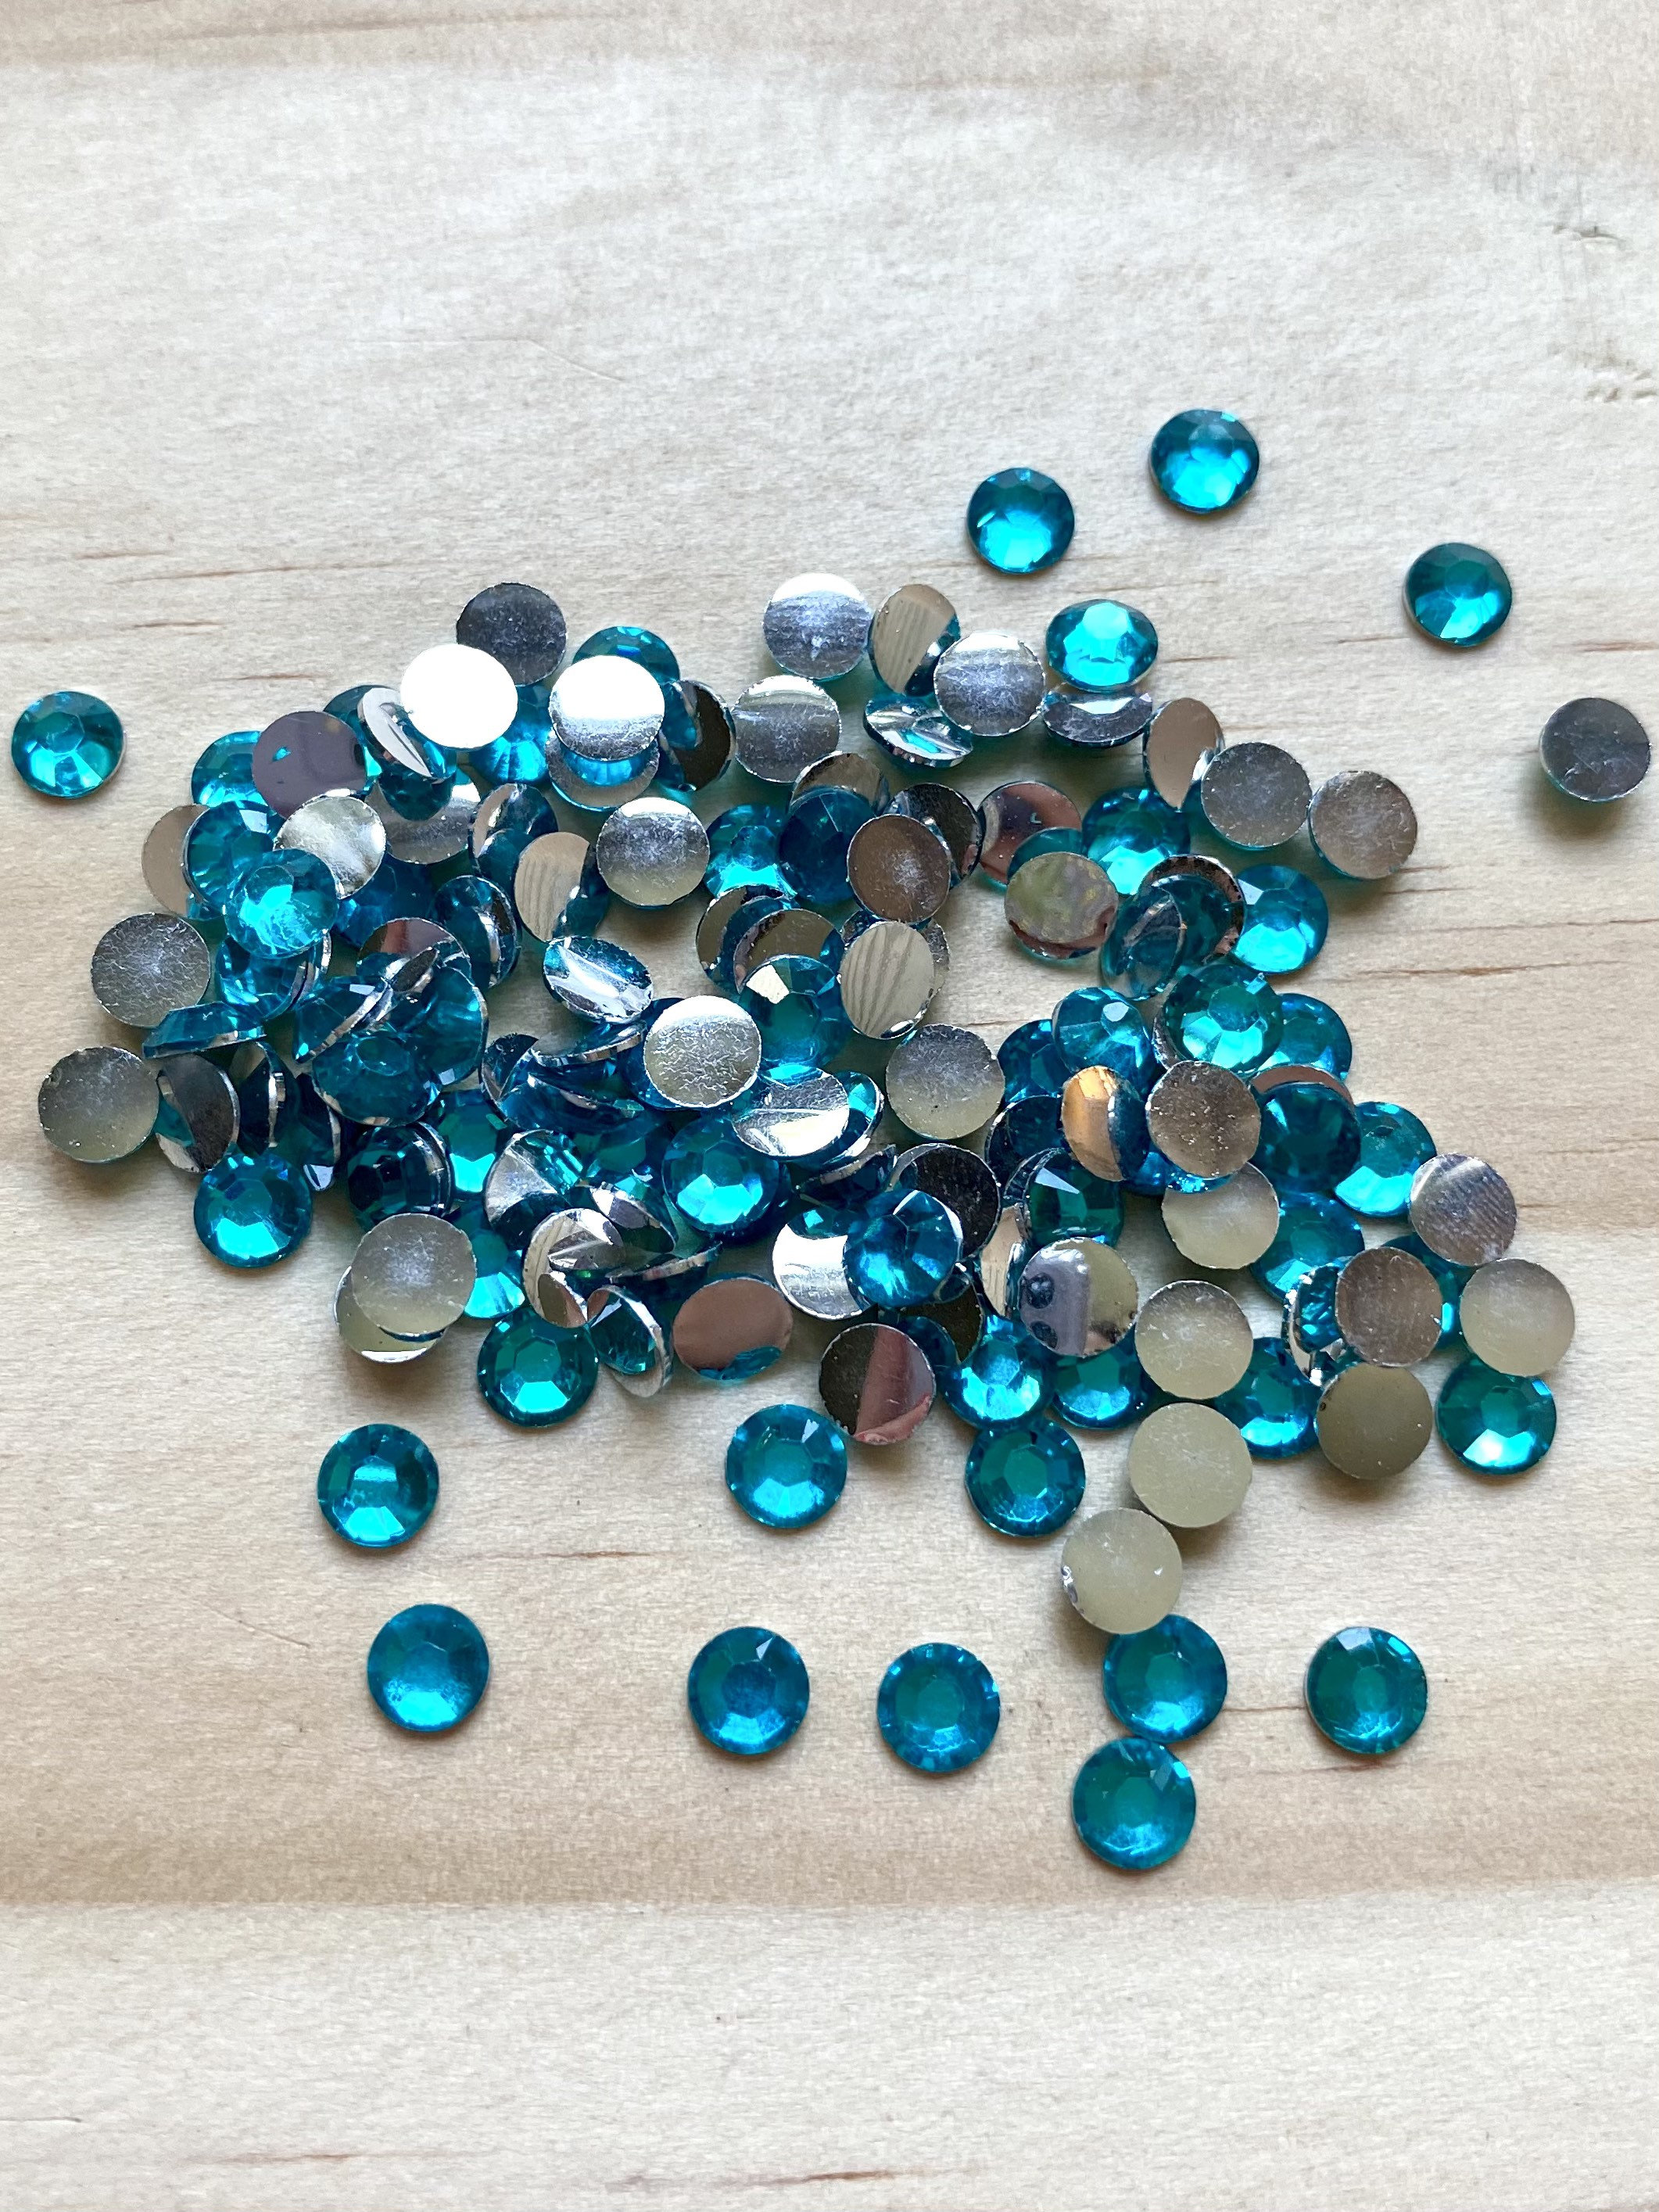 OPAQUE NAVY BLUE Flatback Jelly Resin Rhinestones with No Ab Coating Choose  Size 2mm 3mm 4mm 5mm or 6mm Bling Embellishments Nonhotfix